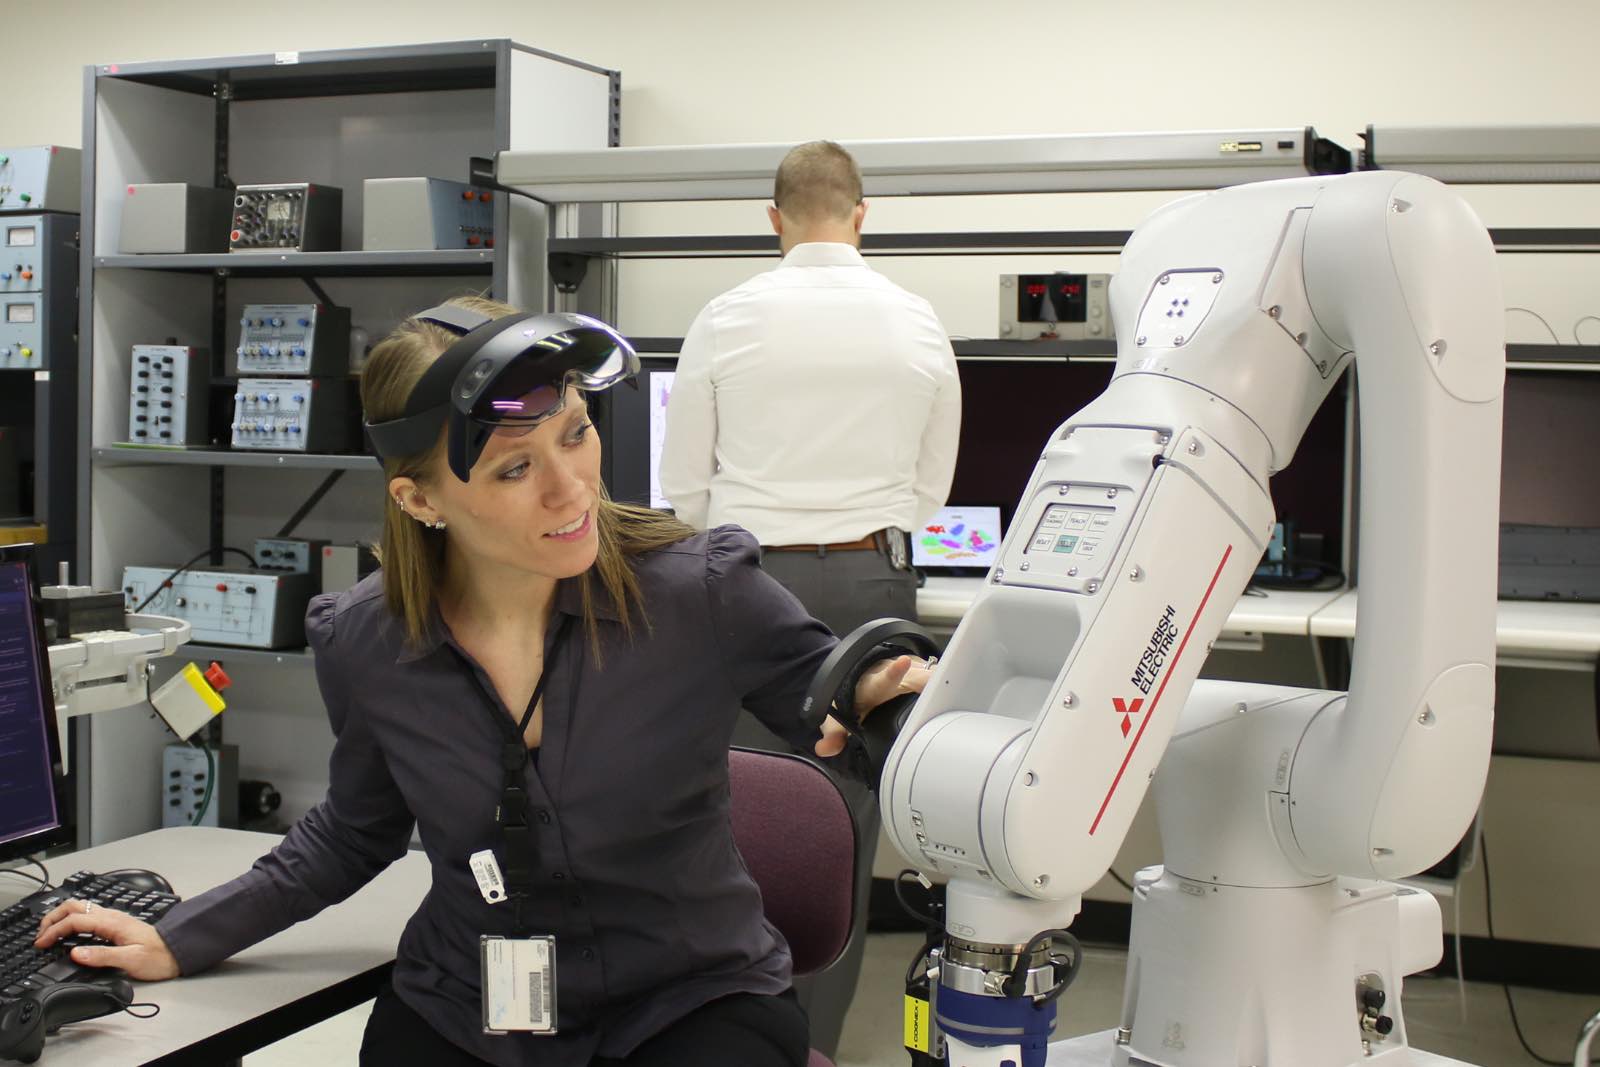 A professional learner uses a robot at the K-State Salina campus